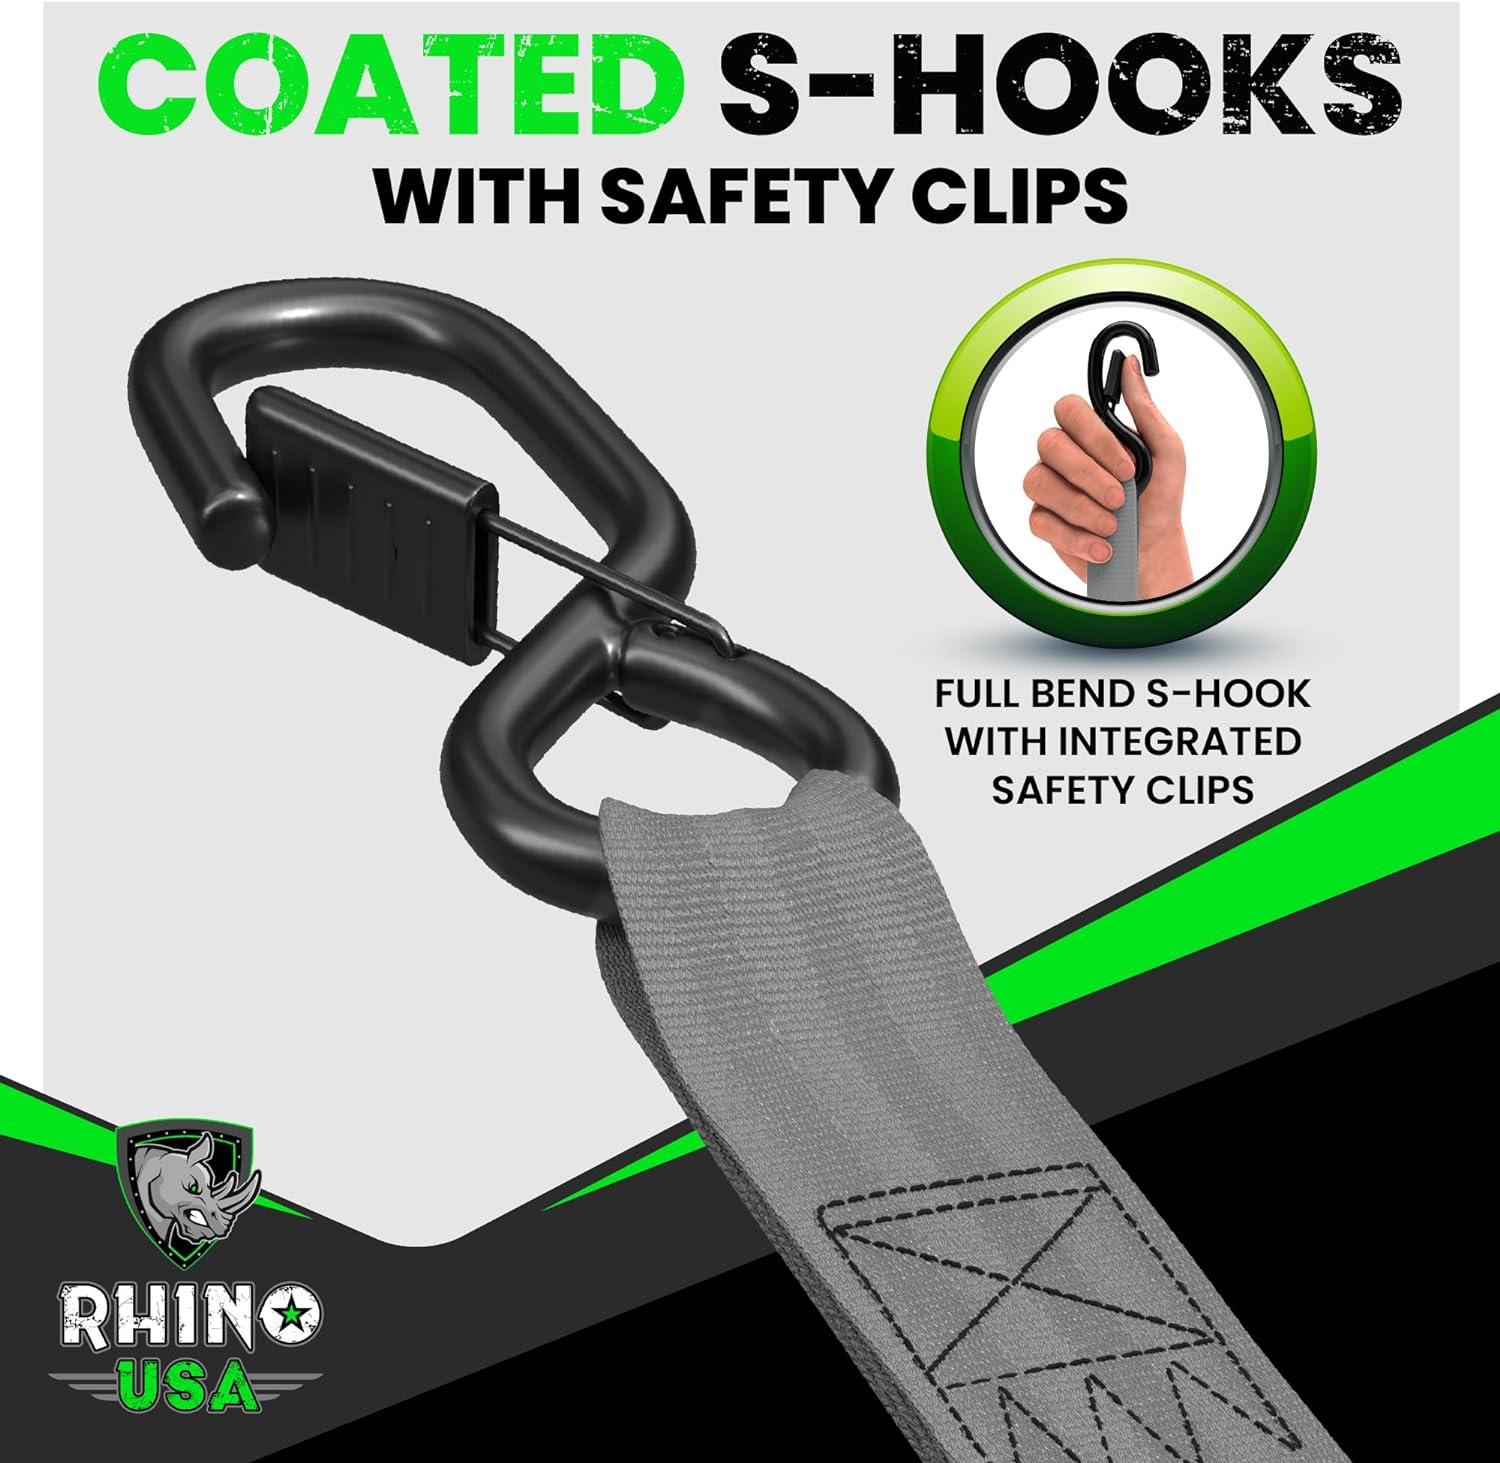 Rhino USA Retractable Ratchet Tie Down Straps (4PK) - 1 209lb Guaranteed  Max Break Strength Includes (4) Ultimate 1 x 10' Autoretract Tie Downs  with Padded Handles. Use for Boat Securing Cargo